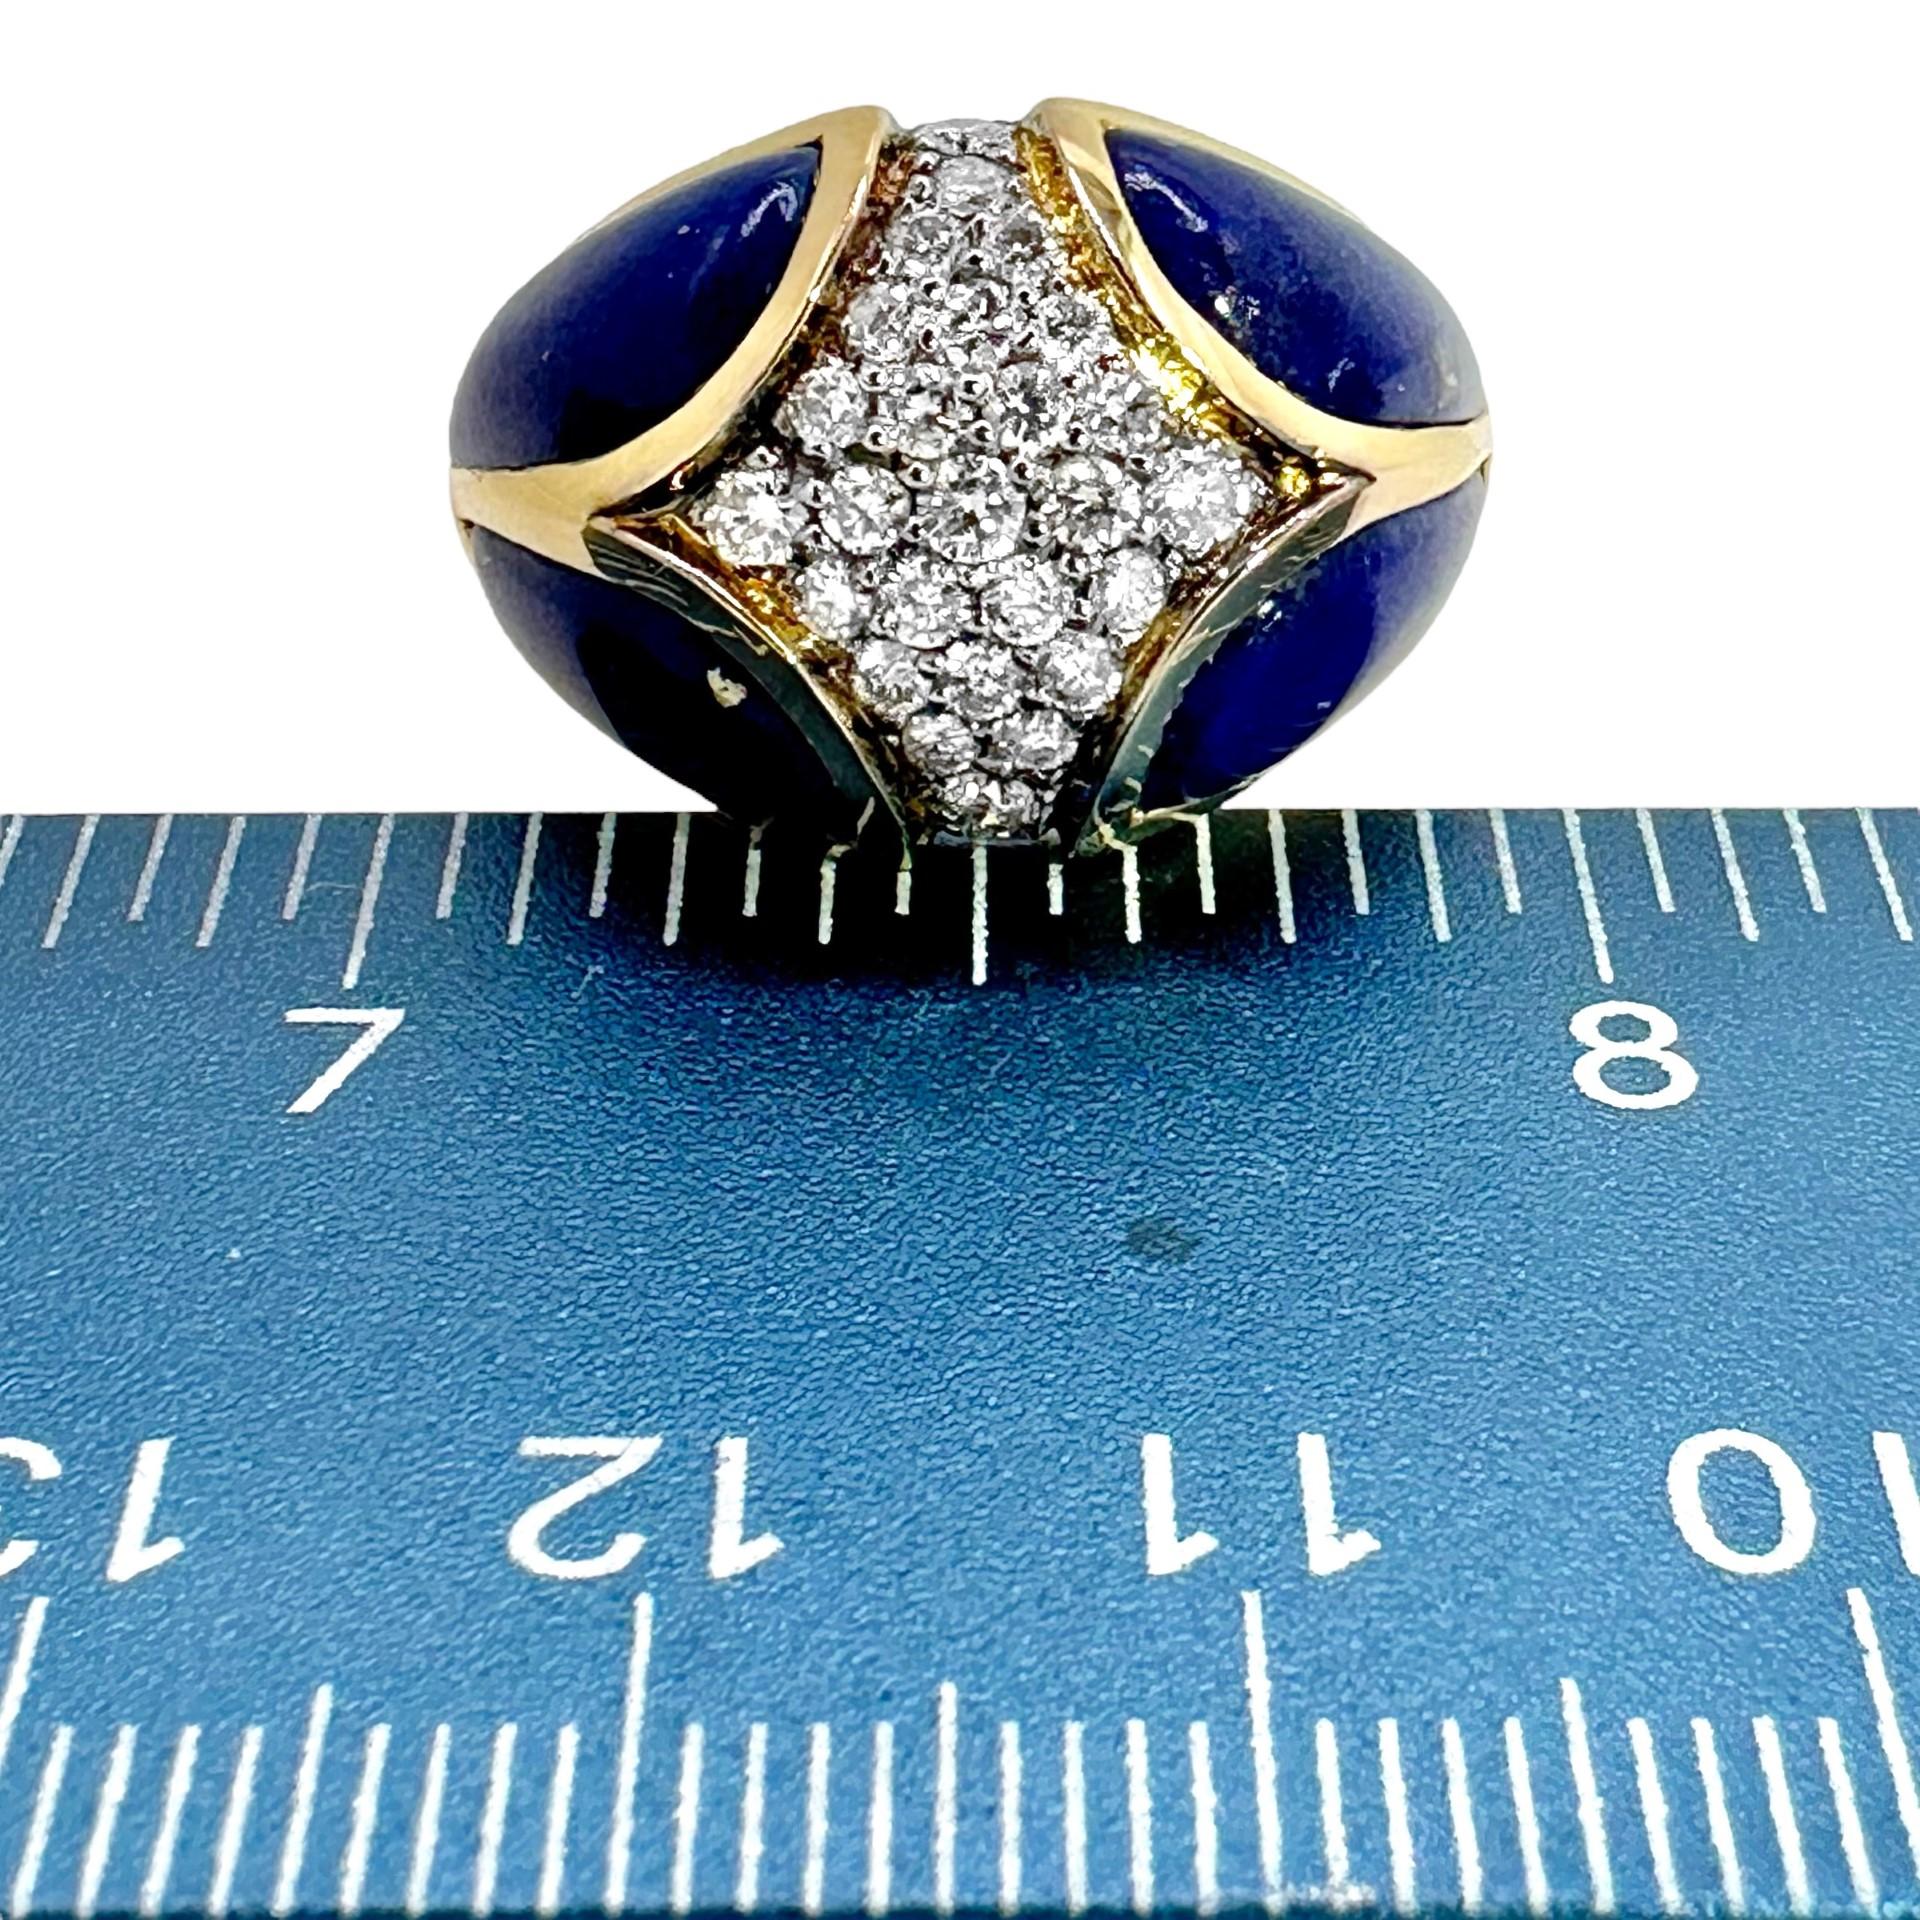 Late-20th Century 18k Yellow Gold, Lapis-Lazuli and Diamond Fashion Ring For Sale 2